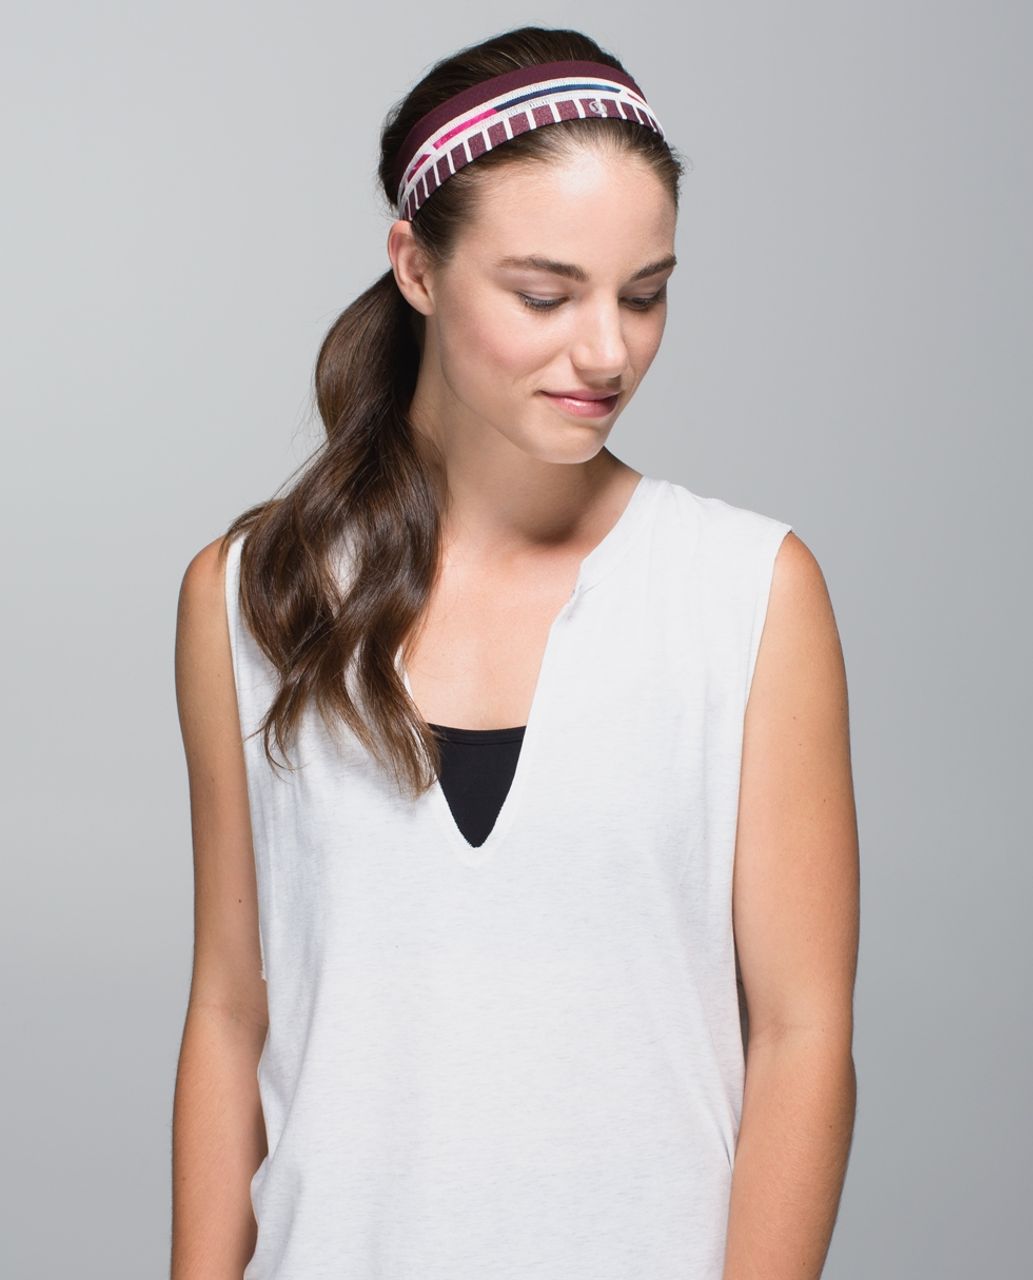 Lululemon Fly Away Tamer Headband *Quilt - Diamond Dot Bordeaux Drama Black / Inky Floral Ghost Inkwell Bumble Berry / West2east Stripe Heathered Bordeaux Drama